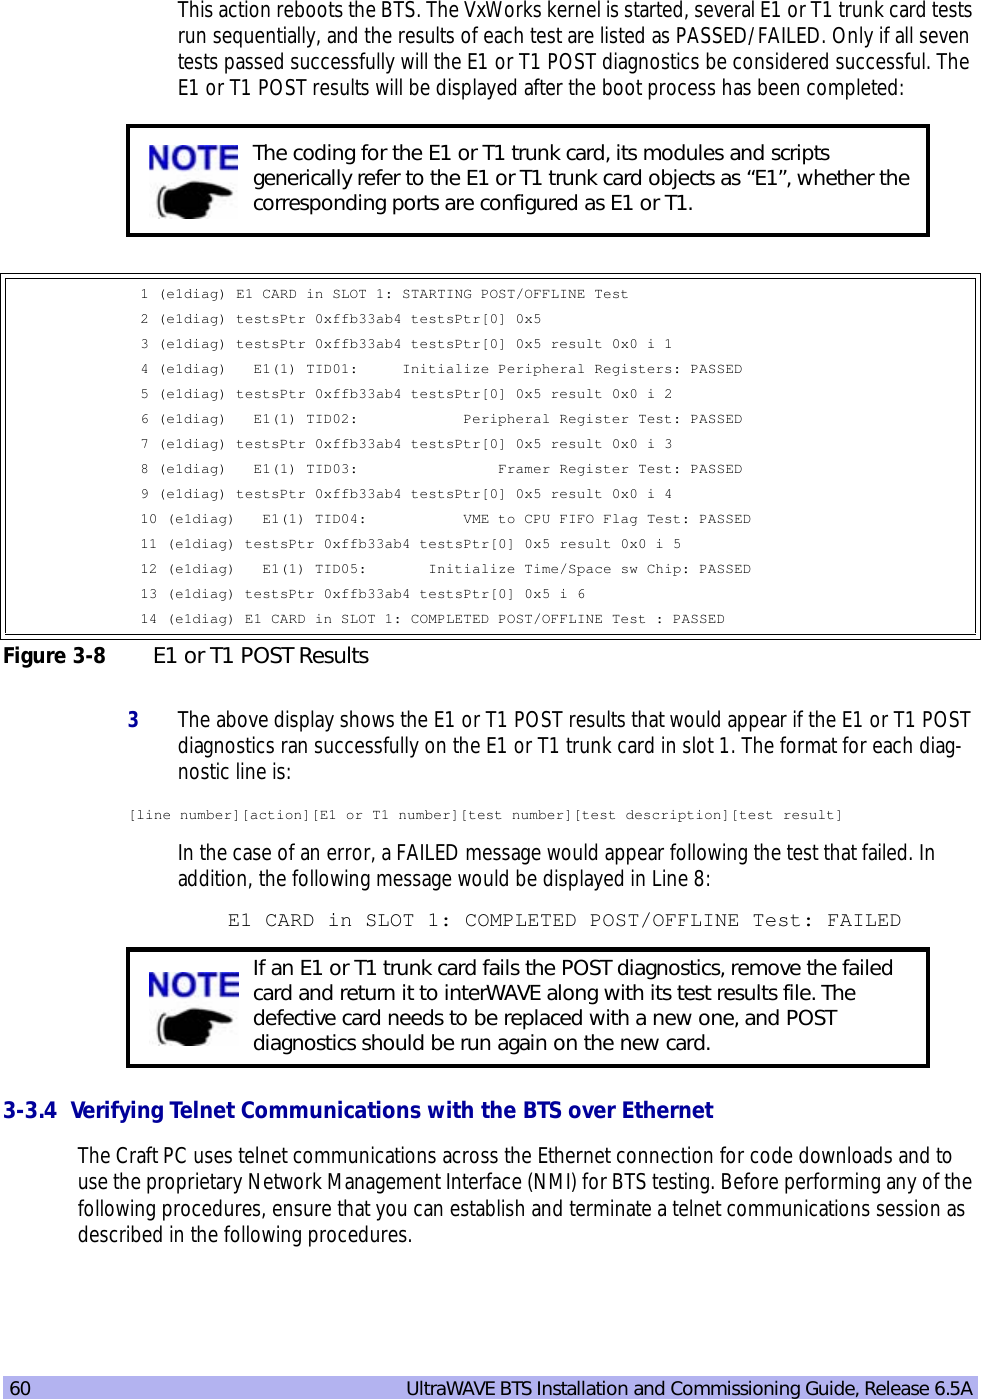 60   UltraWAVE BTS Installation and Commissioning Guide, Release 6.5AThis action reboots the BTS. The VxWorks kernel is started, several E1 or T1 trunk card tests run sequentially, and the results of each test are listed as PASSED/FAILED. Only if all seven tests passed successfully will the E1 or T1 POST diagnostics be considered successful. The E1 or T1 POST results will be displayed after the boot process has been completed:3The above display shows the E1 or T1 POST results that would appear if the E1 or T1 POST diagnostics ran successfully on the E1 or T1 trunk card in slot 1. The format for each diag-nostic line is:[line number][action][E1 or T1 number][test number][test description][test result]In the case of an error, a FAILED message would appear following the test that failed. In addition, the following message would be displayed in Line 8:E1 CARD in SLOT 1: COMPLETED POST/OFFLINE Test: FAILED3-3.4  Verifying Telnet Communications with the BTS over EthernetThe Craft PC uses telnet communications across the Ethernet connection for code downloads and to use the proprietary Network Management Interface (NMI) for BTS testing. Before performing any of the following procedures, ensure that you can establish and terminate a telnet communications session as described in the following procedures.The coding for the E1 or T1 trunk card, its modules and scripts generically refer to the E1 or T1 trunk card objects as “E1”, whether the corresponding ports are configured as E1 or T1.1 (e1diag) E1 CARD in SLOT 1: STARTING POST/OFFLINE Test2 (e1diag) testsPtr 0xffb33ab4 testsPtr[0] 0x53 (e1diag) testsPtr 0xffb33ab4 testsPtr[0] 0x5 result 0x0 i 14 (e1diag)   E1(1) TID01:     Initialize Peripheral Registers: PASSED5 (e1diag) testsPtr 0xffb33ab4 testsPtr[0] 0x5 result 0x0 i 26 (e1diag)   E1(1) TID02:            Peripheral Register Test: PASSED7 (e1diag) testsPtr 0xffb33ab4 testsPtr[0] 0x5 result 0x0 i 38 (e1diag)   E1(1) TID03:                Framer Register Test: PASSED9 (e1diag) testsPtr 0xffb33ab4 testsPtr[0] 0x5 result 0x0 i 410 (e1diag)   E1(1) TID04:           VME to CPU FIFO Flag Test: PASSED11 (e1diag) testsPtr 0xffb33ab4 testsPtr[0] 0x5 result 0x0 i 512 (e1diag)   E1(1) TID05:       Initialize Time/Space sw Chip: PASSED13 (e1diag) testsPtr 0xffb33ab4 testsPtr[0] 0x5 i 614 (e1diag) E1 CARD in SLOT 1: COMPLETED POST/OFFLINE Test : PASSEDFigure 3-8 E1 or T1 POST ResultsIf an E1 or T1 trunk card fails the POST diagnostics, remove the failed card and return it to interWAVE along with its test results file. The defective card needs to be replaced with a new one, and POST diagnostics should be run again on the new card.